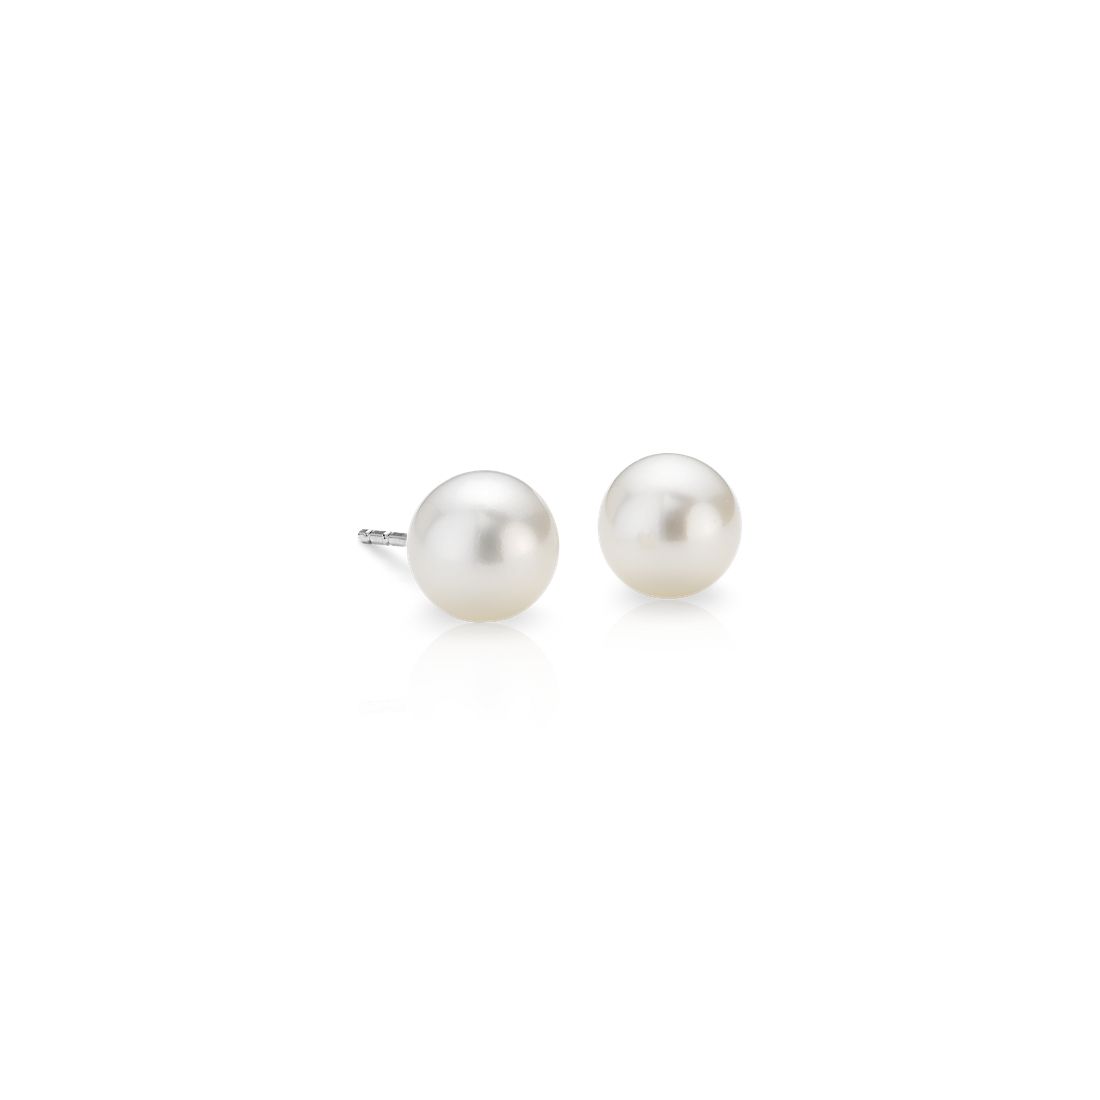 6-14mm White Natural Freshwater Cultured Pearl Silver Stud Earrings